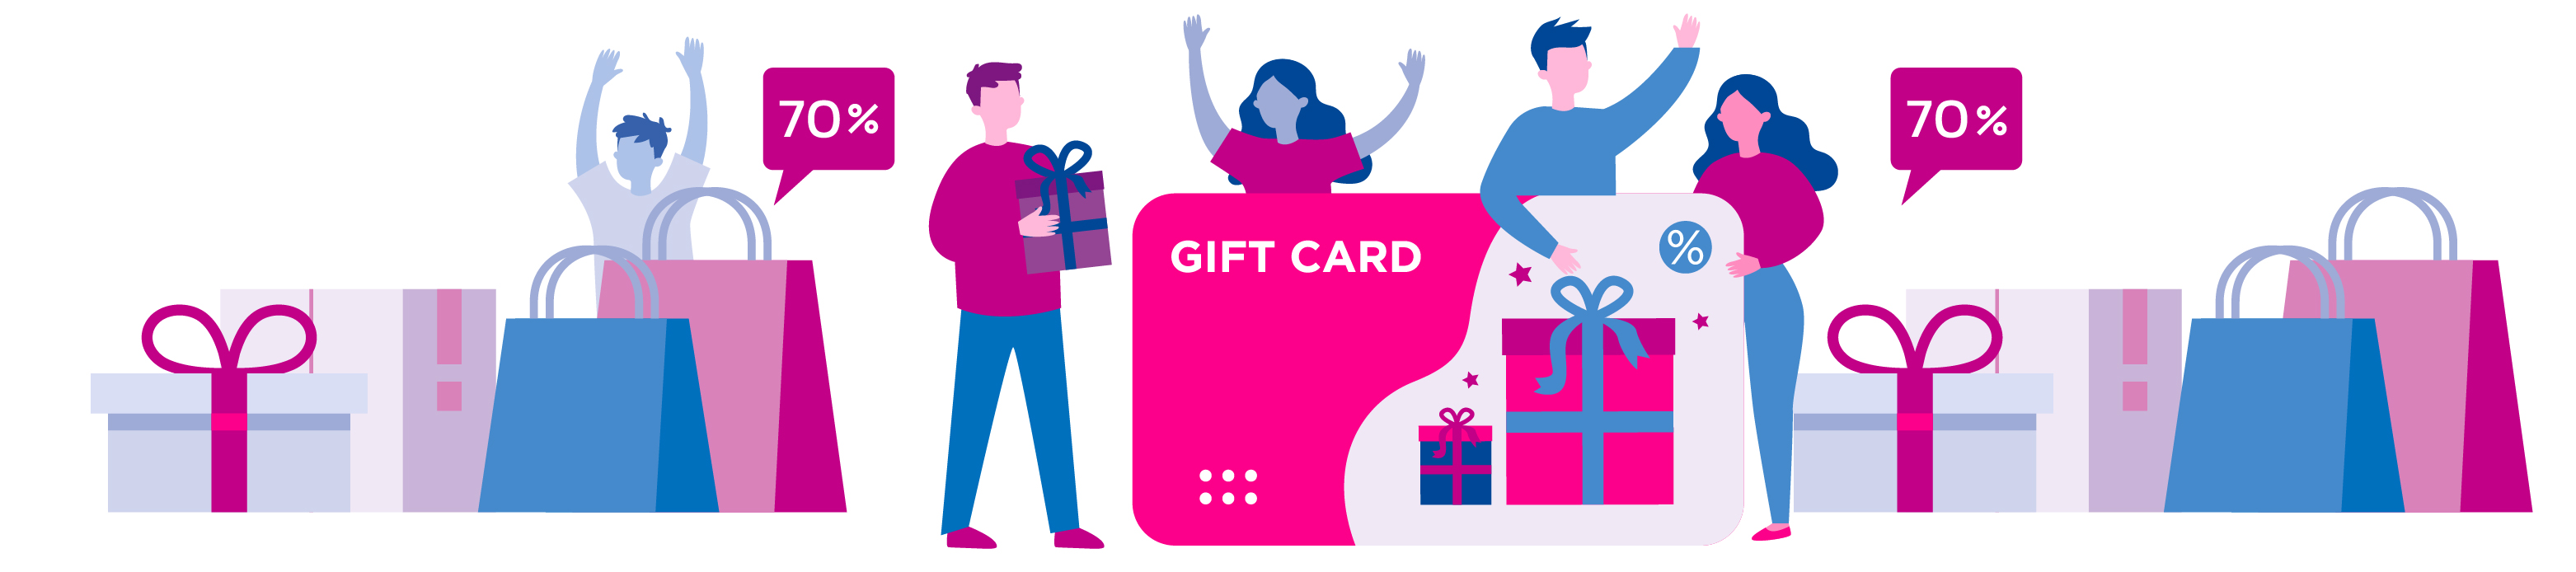 Customer loyalty is rewarded with things like discounts and gift cards.